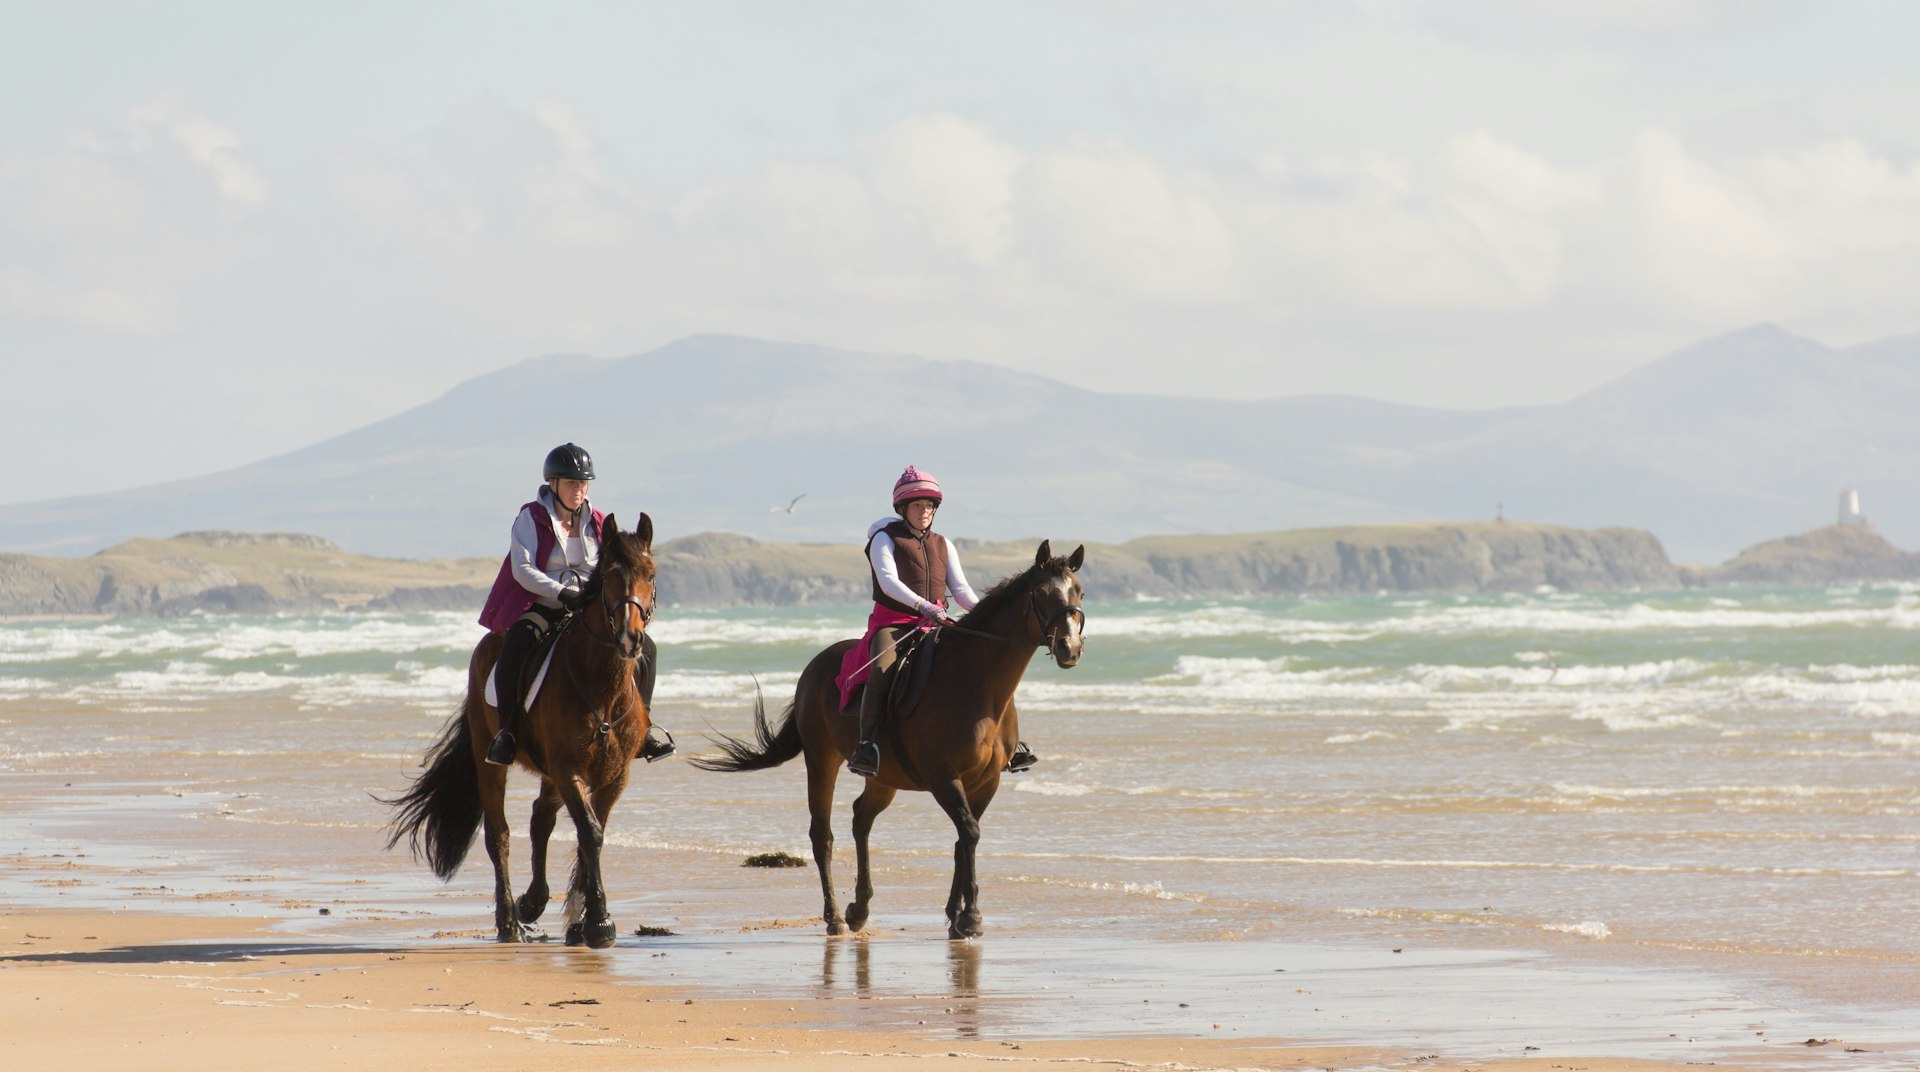 Two people ride on brown horses on an otherwise empty sandy beach